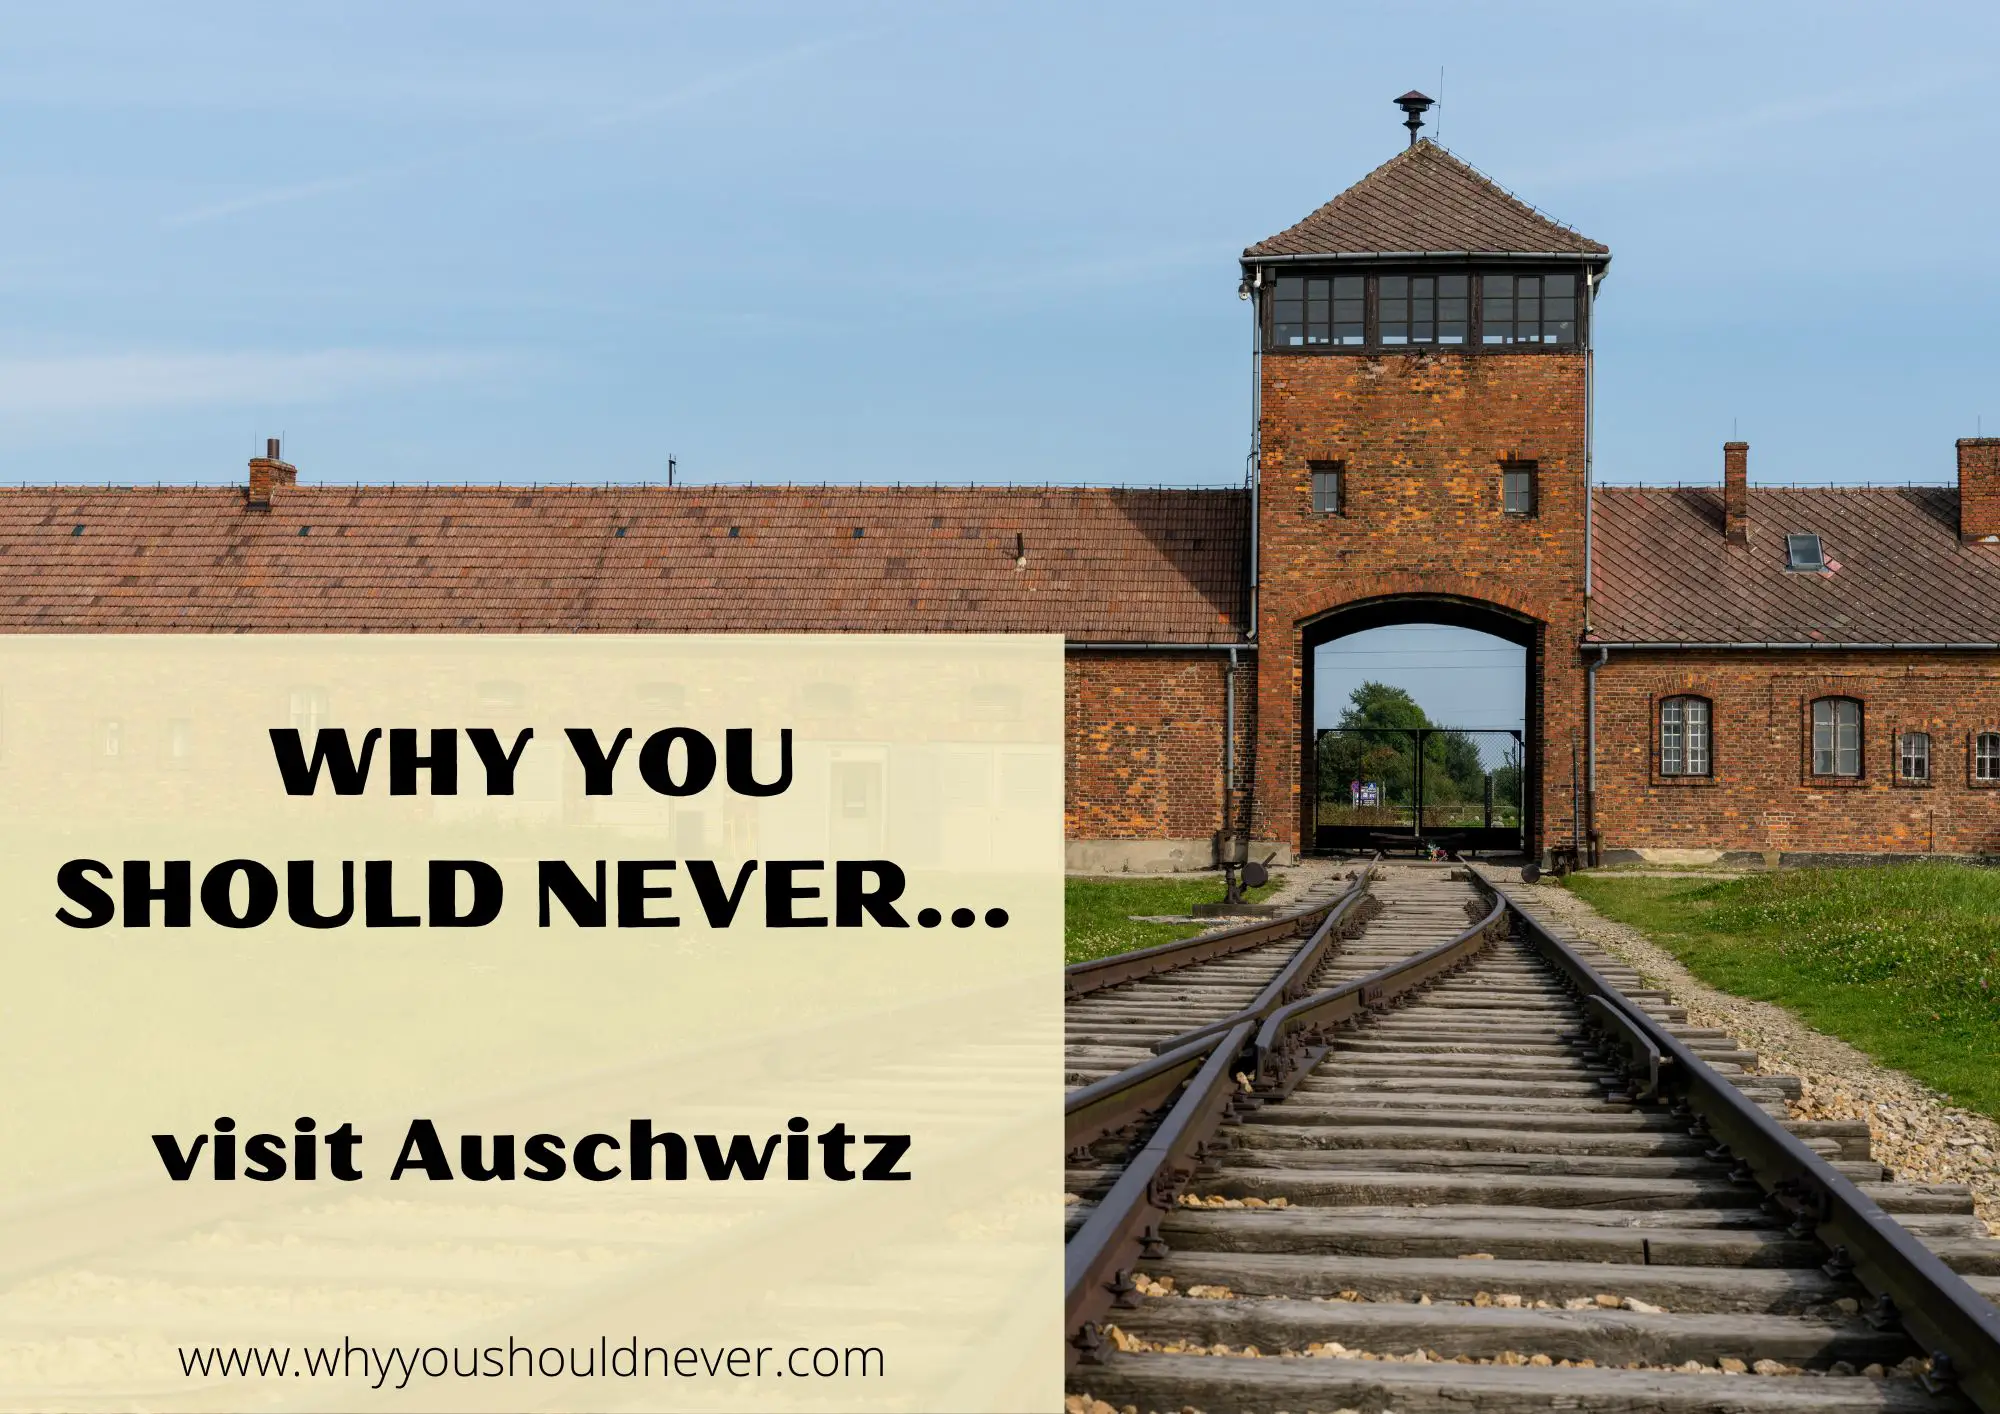 Why You Should Never Visit Auschwitz